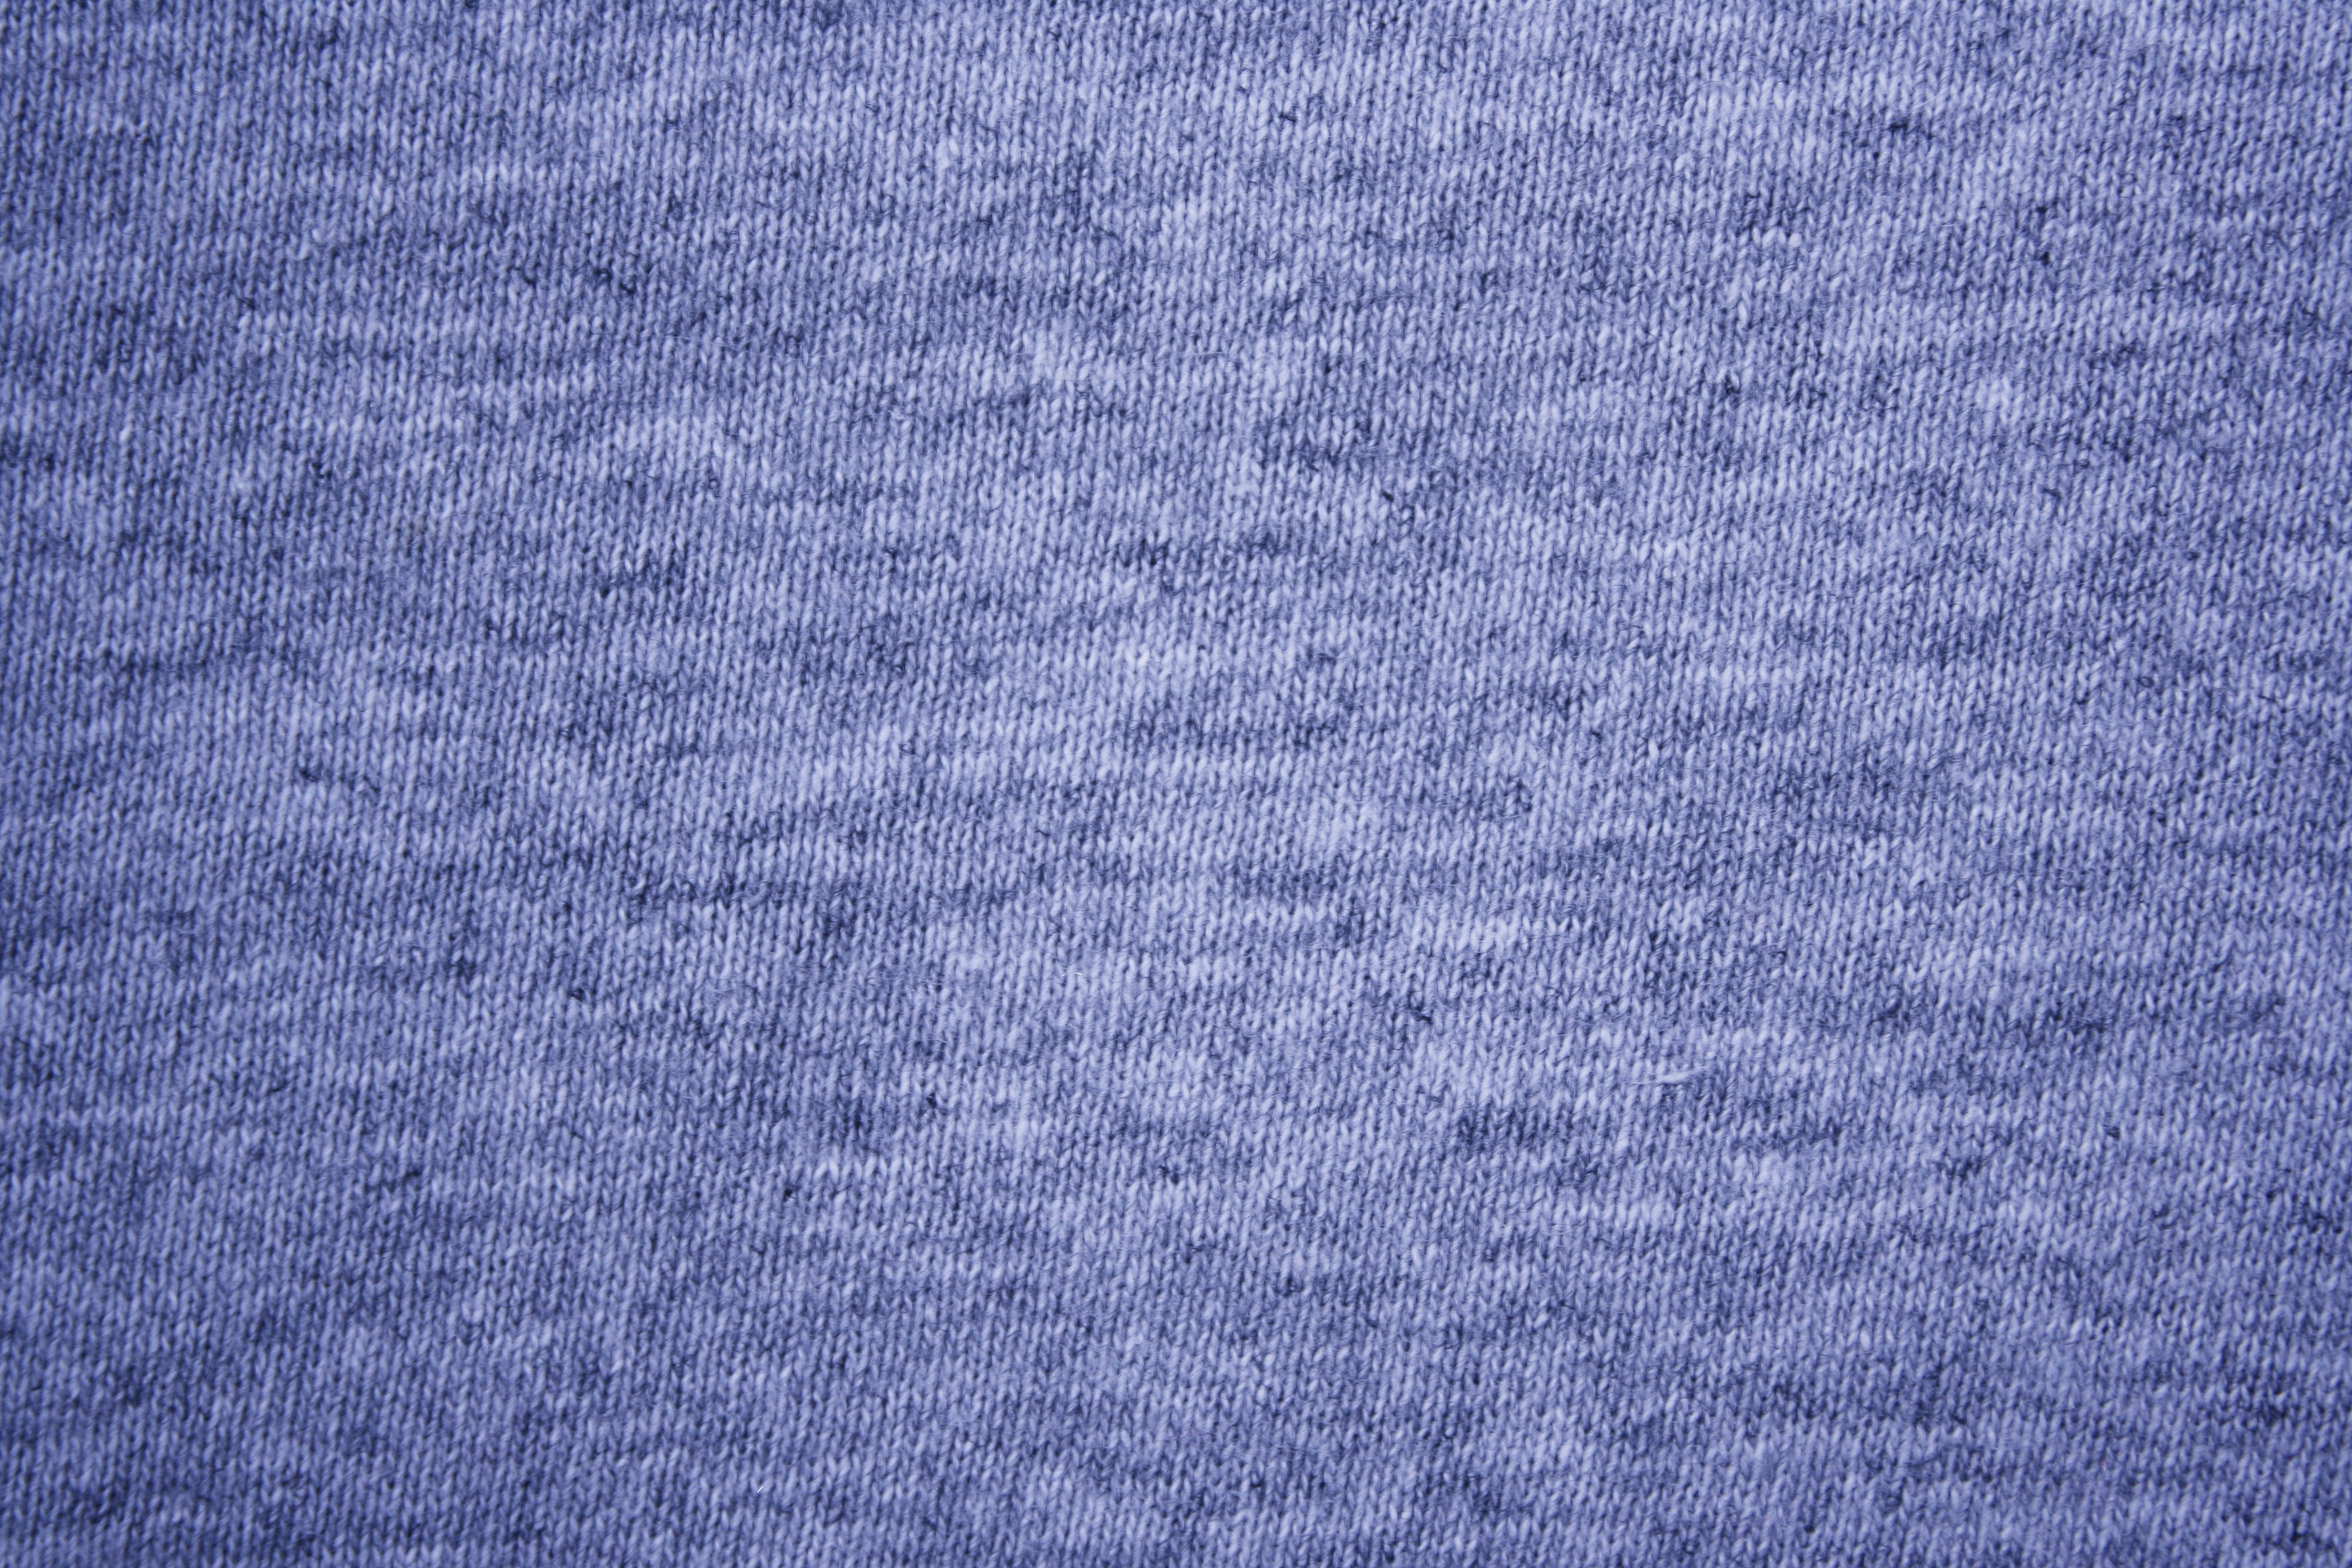 Blue Heather Knit T-Shirt Fabric Texture Picture, Free Photograph